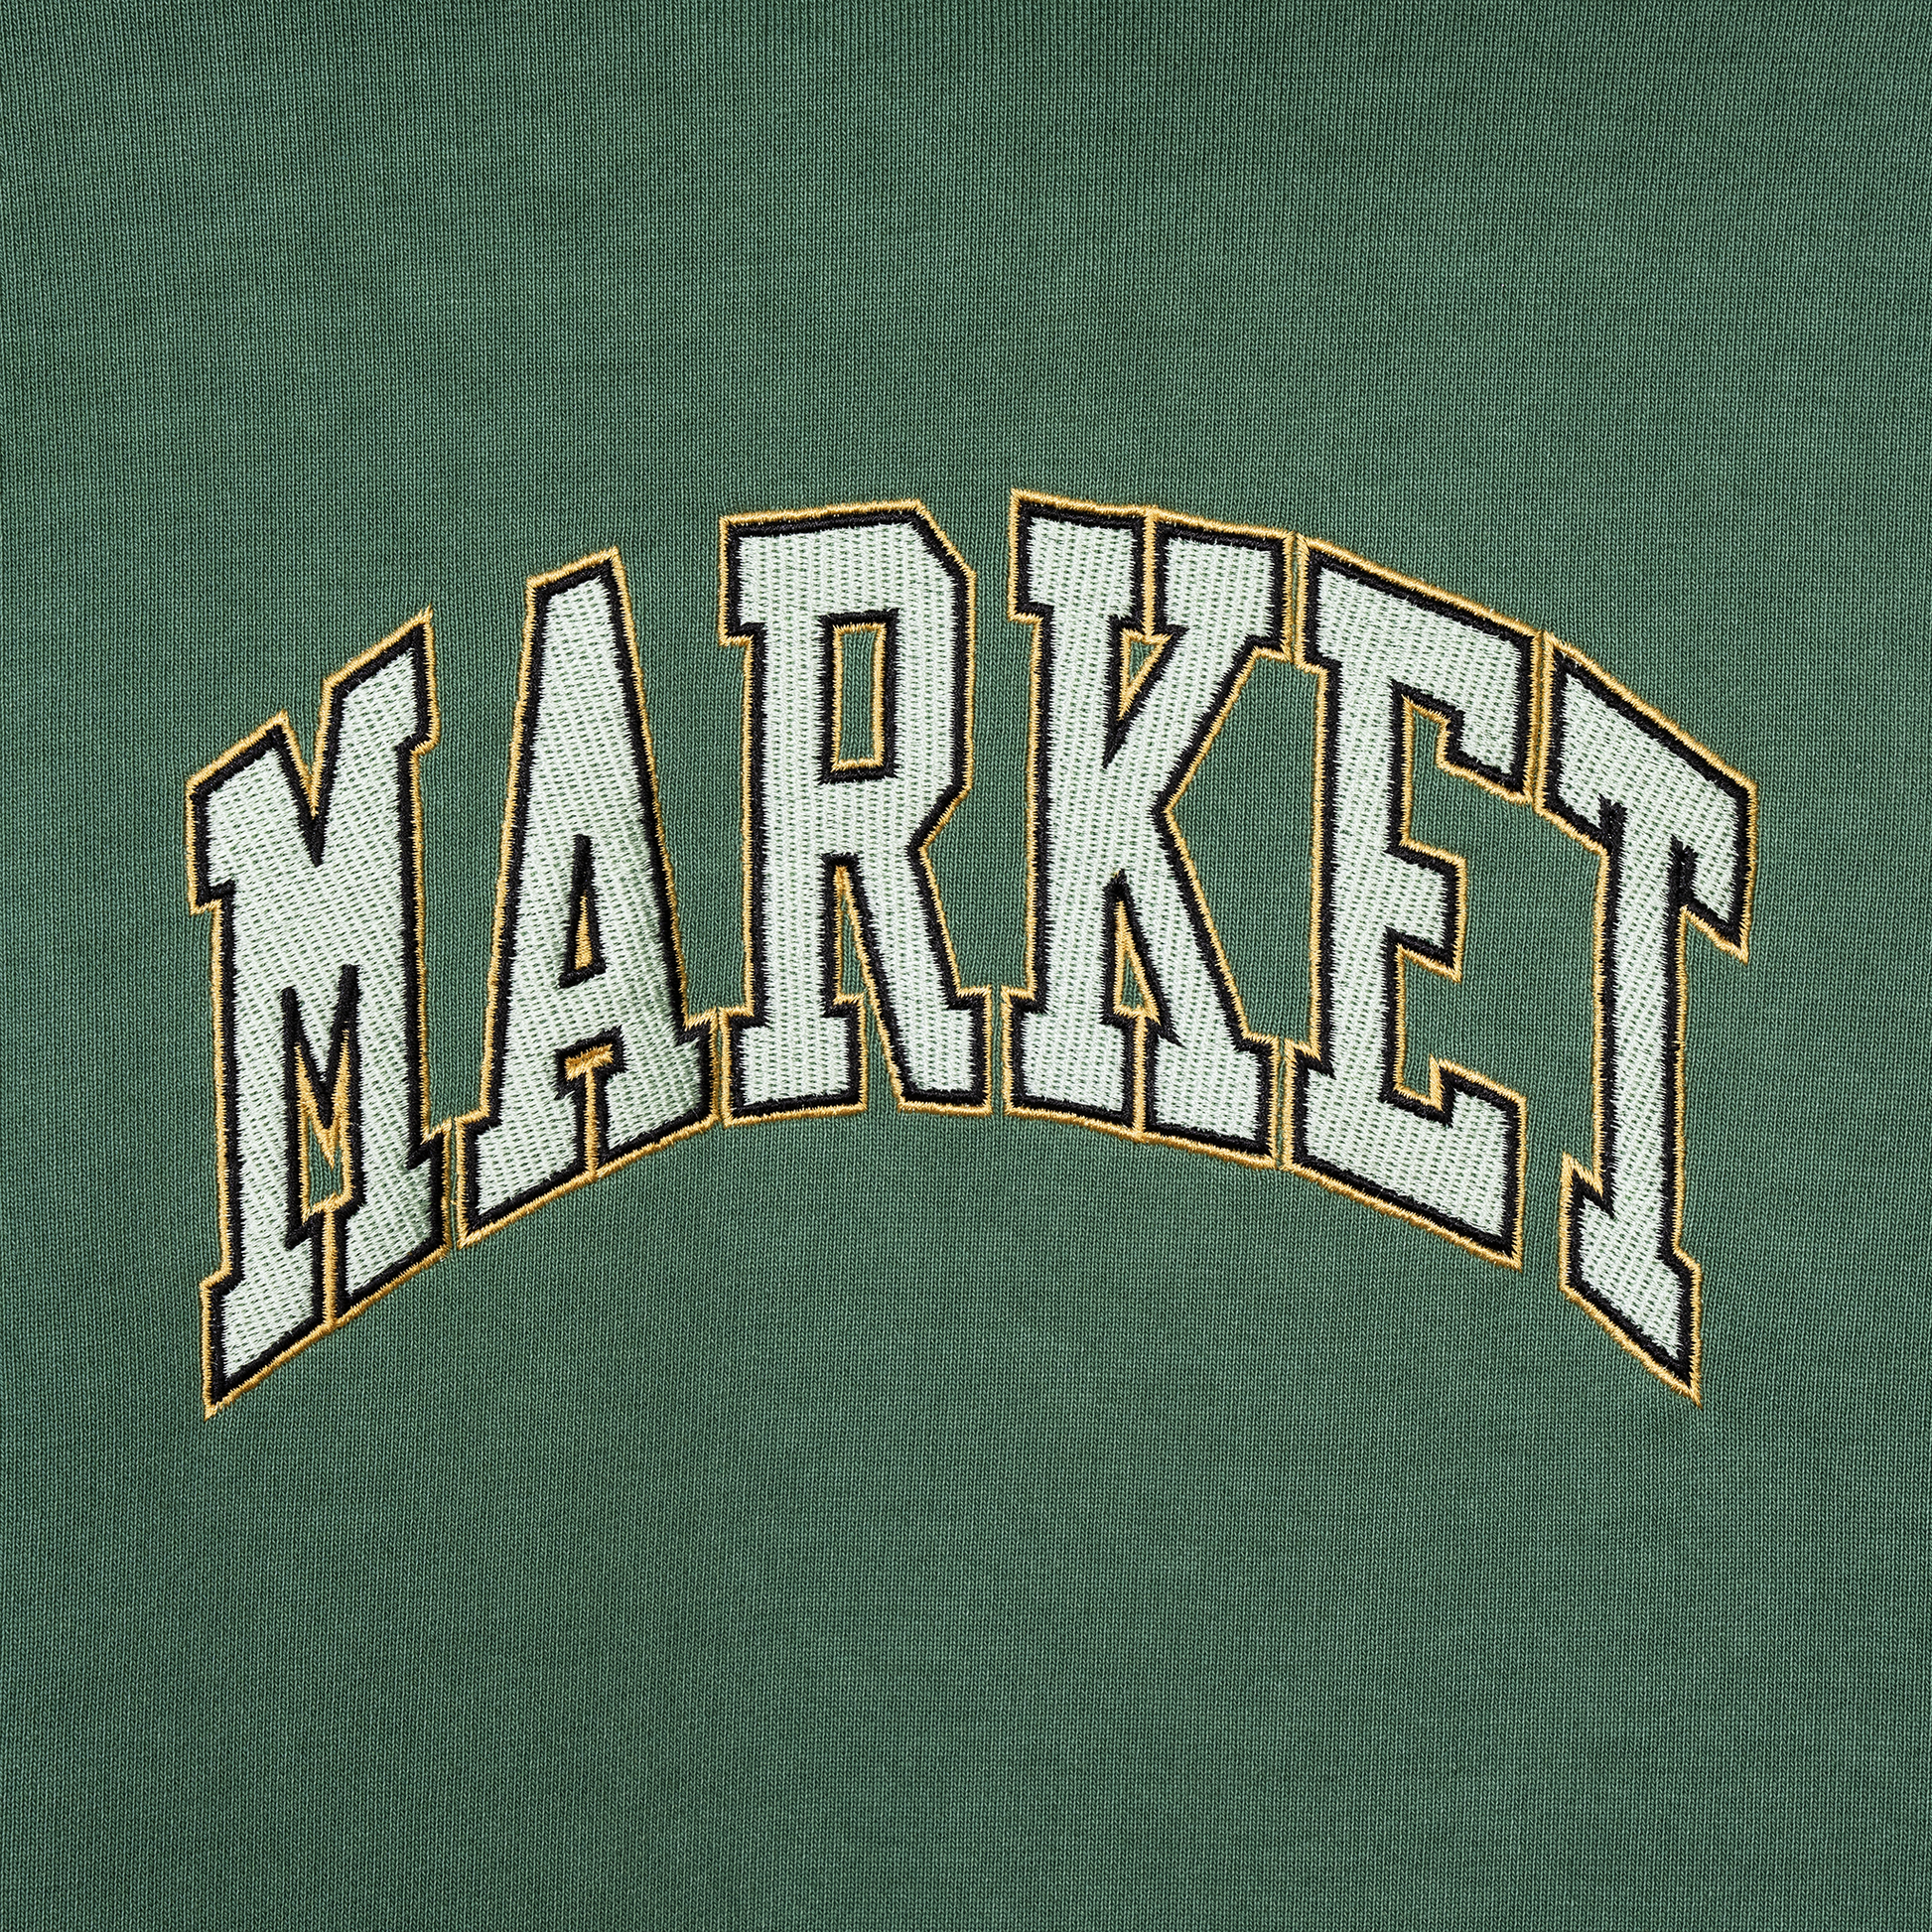 MARKET clothing brand TRIPLE STITCH PULLOVER HOODIE. Find more graphic tees, hats and more at MarketStudios.com. Formally Chinatown Market.